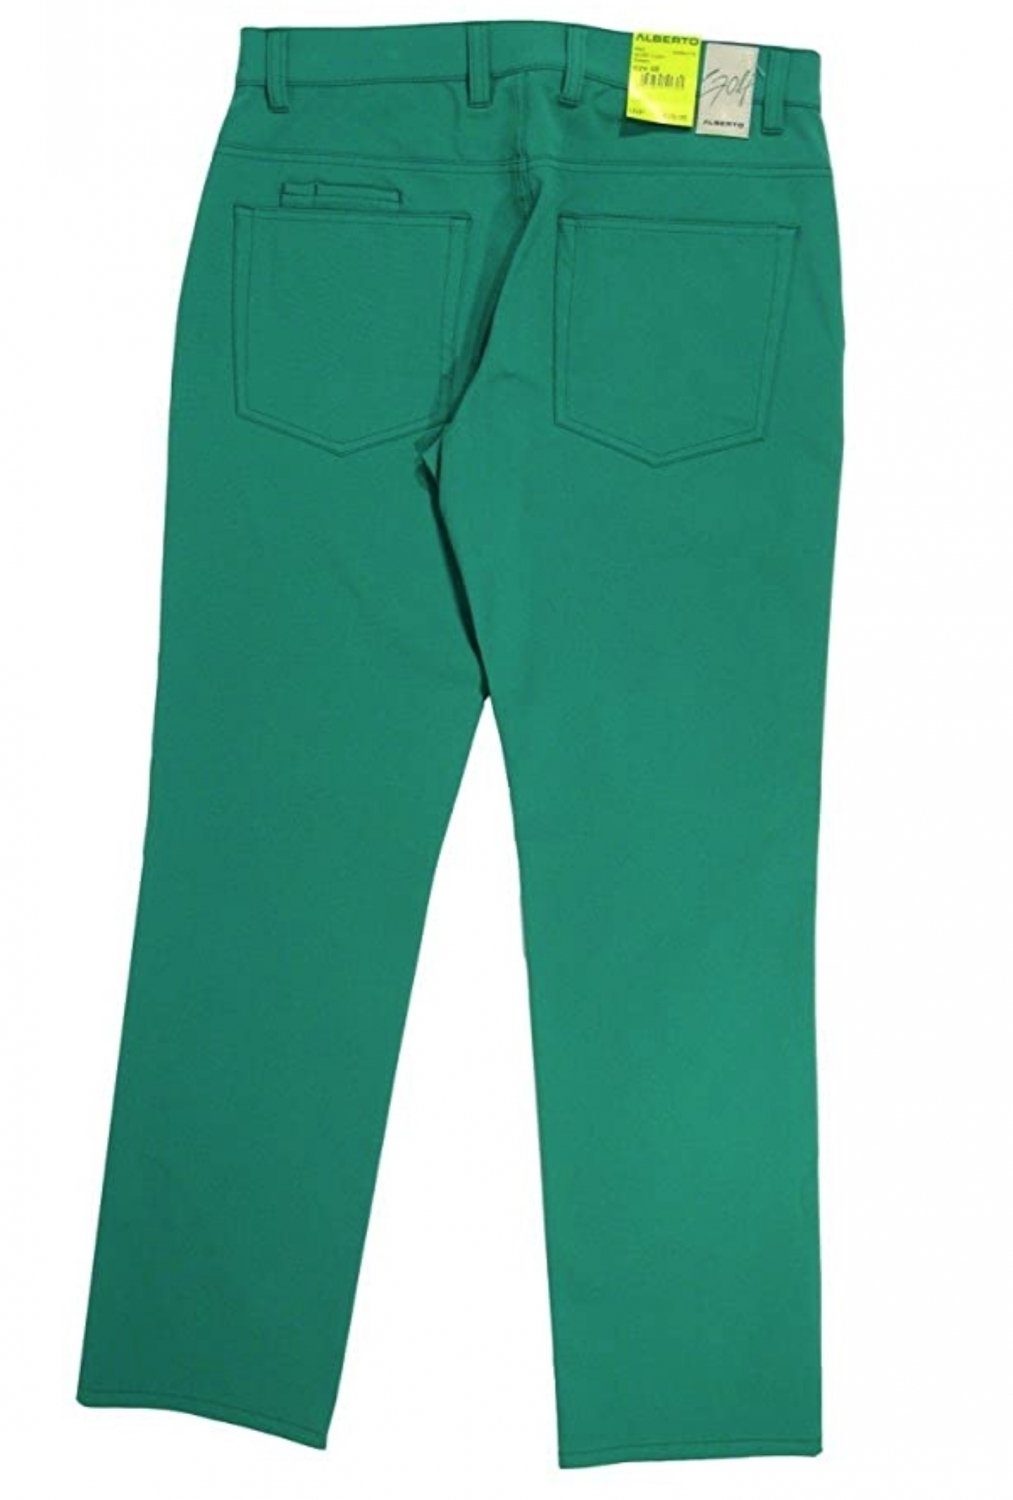 GREEN Golfhose COOLER DRY 3X Alberto PRO